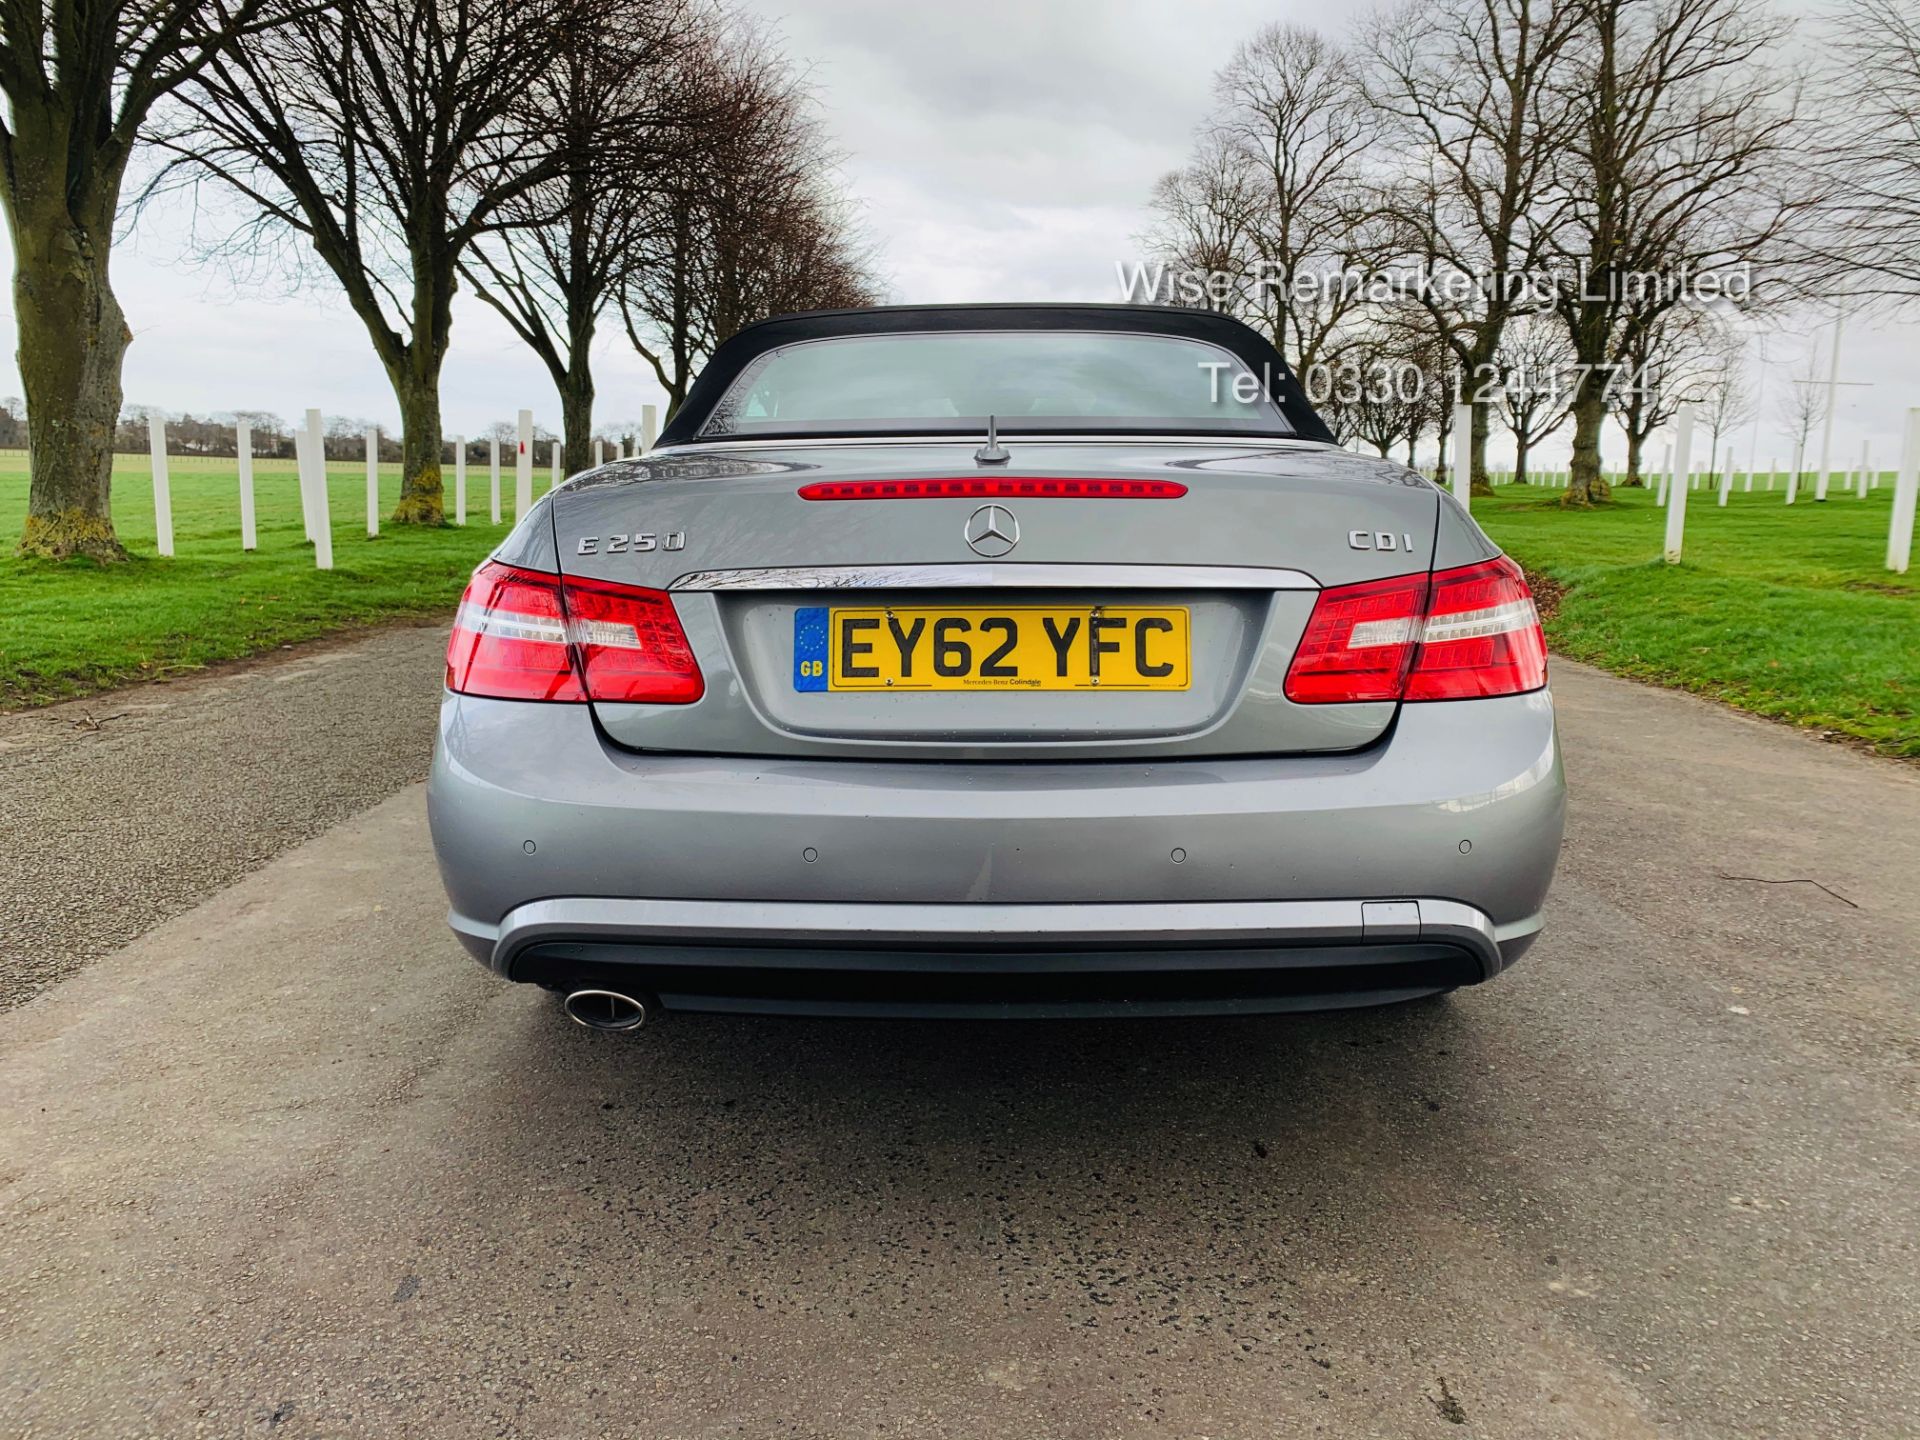 Mercedes E250 CDI Convertible Sport Tip Auto - 2013 Model - Service History - Leather - Parking aid - Image 5 of 27